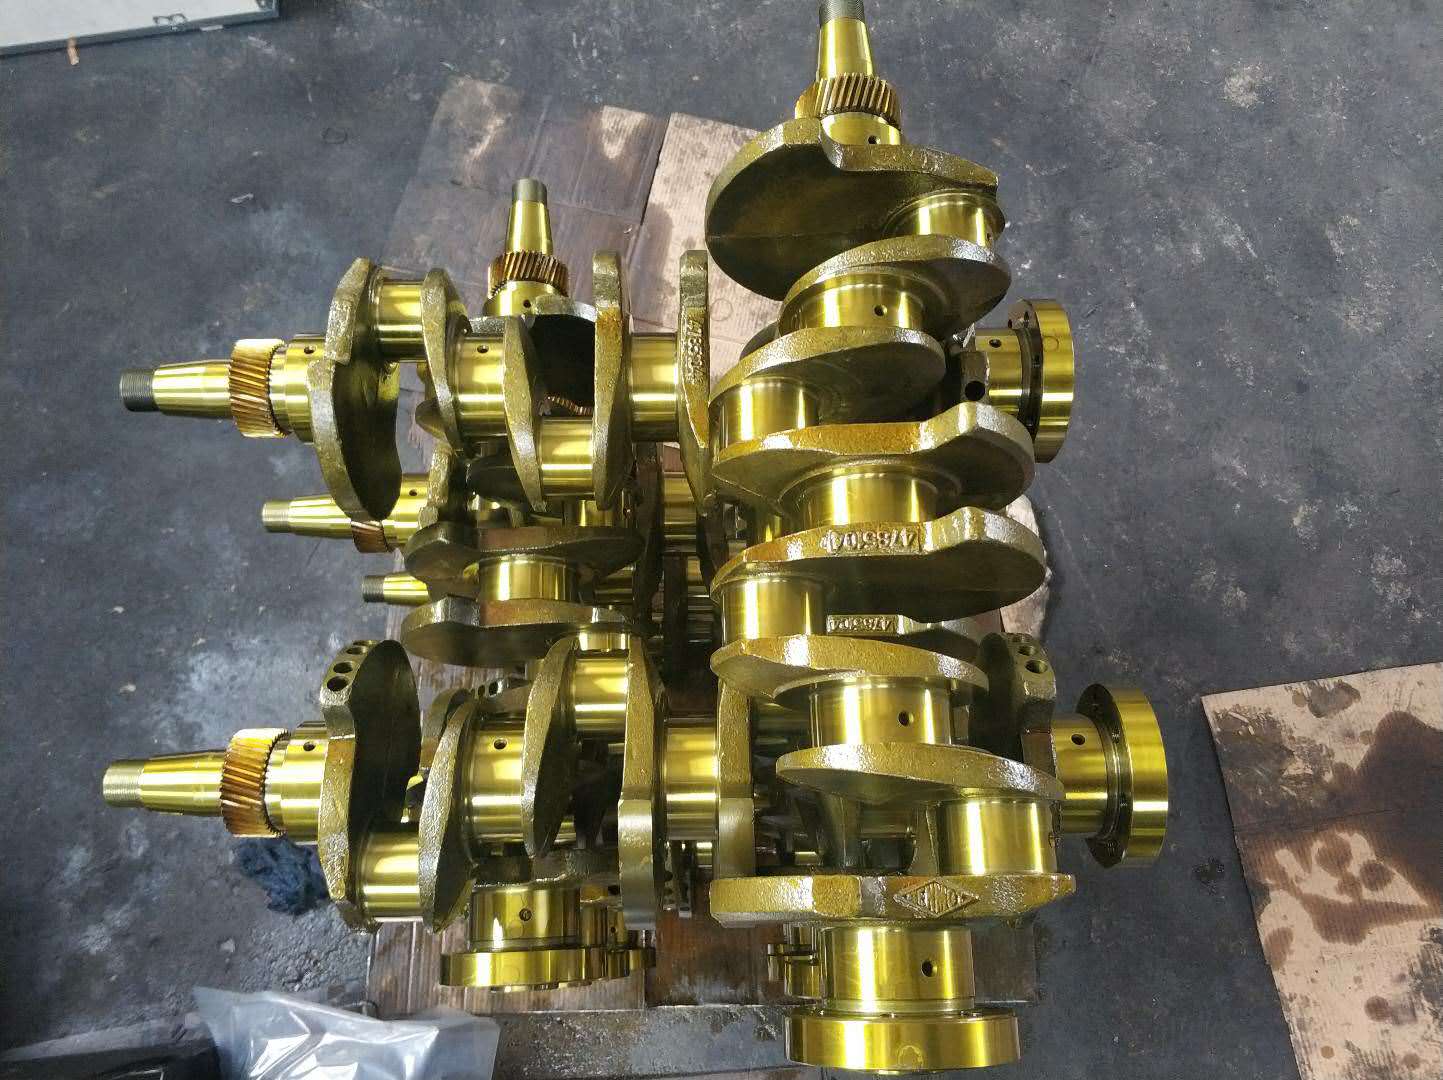 Renault crankshaft, exported to Egypt, being loaded